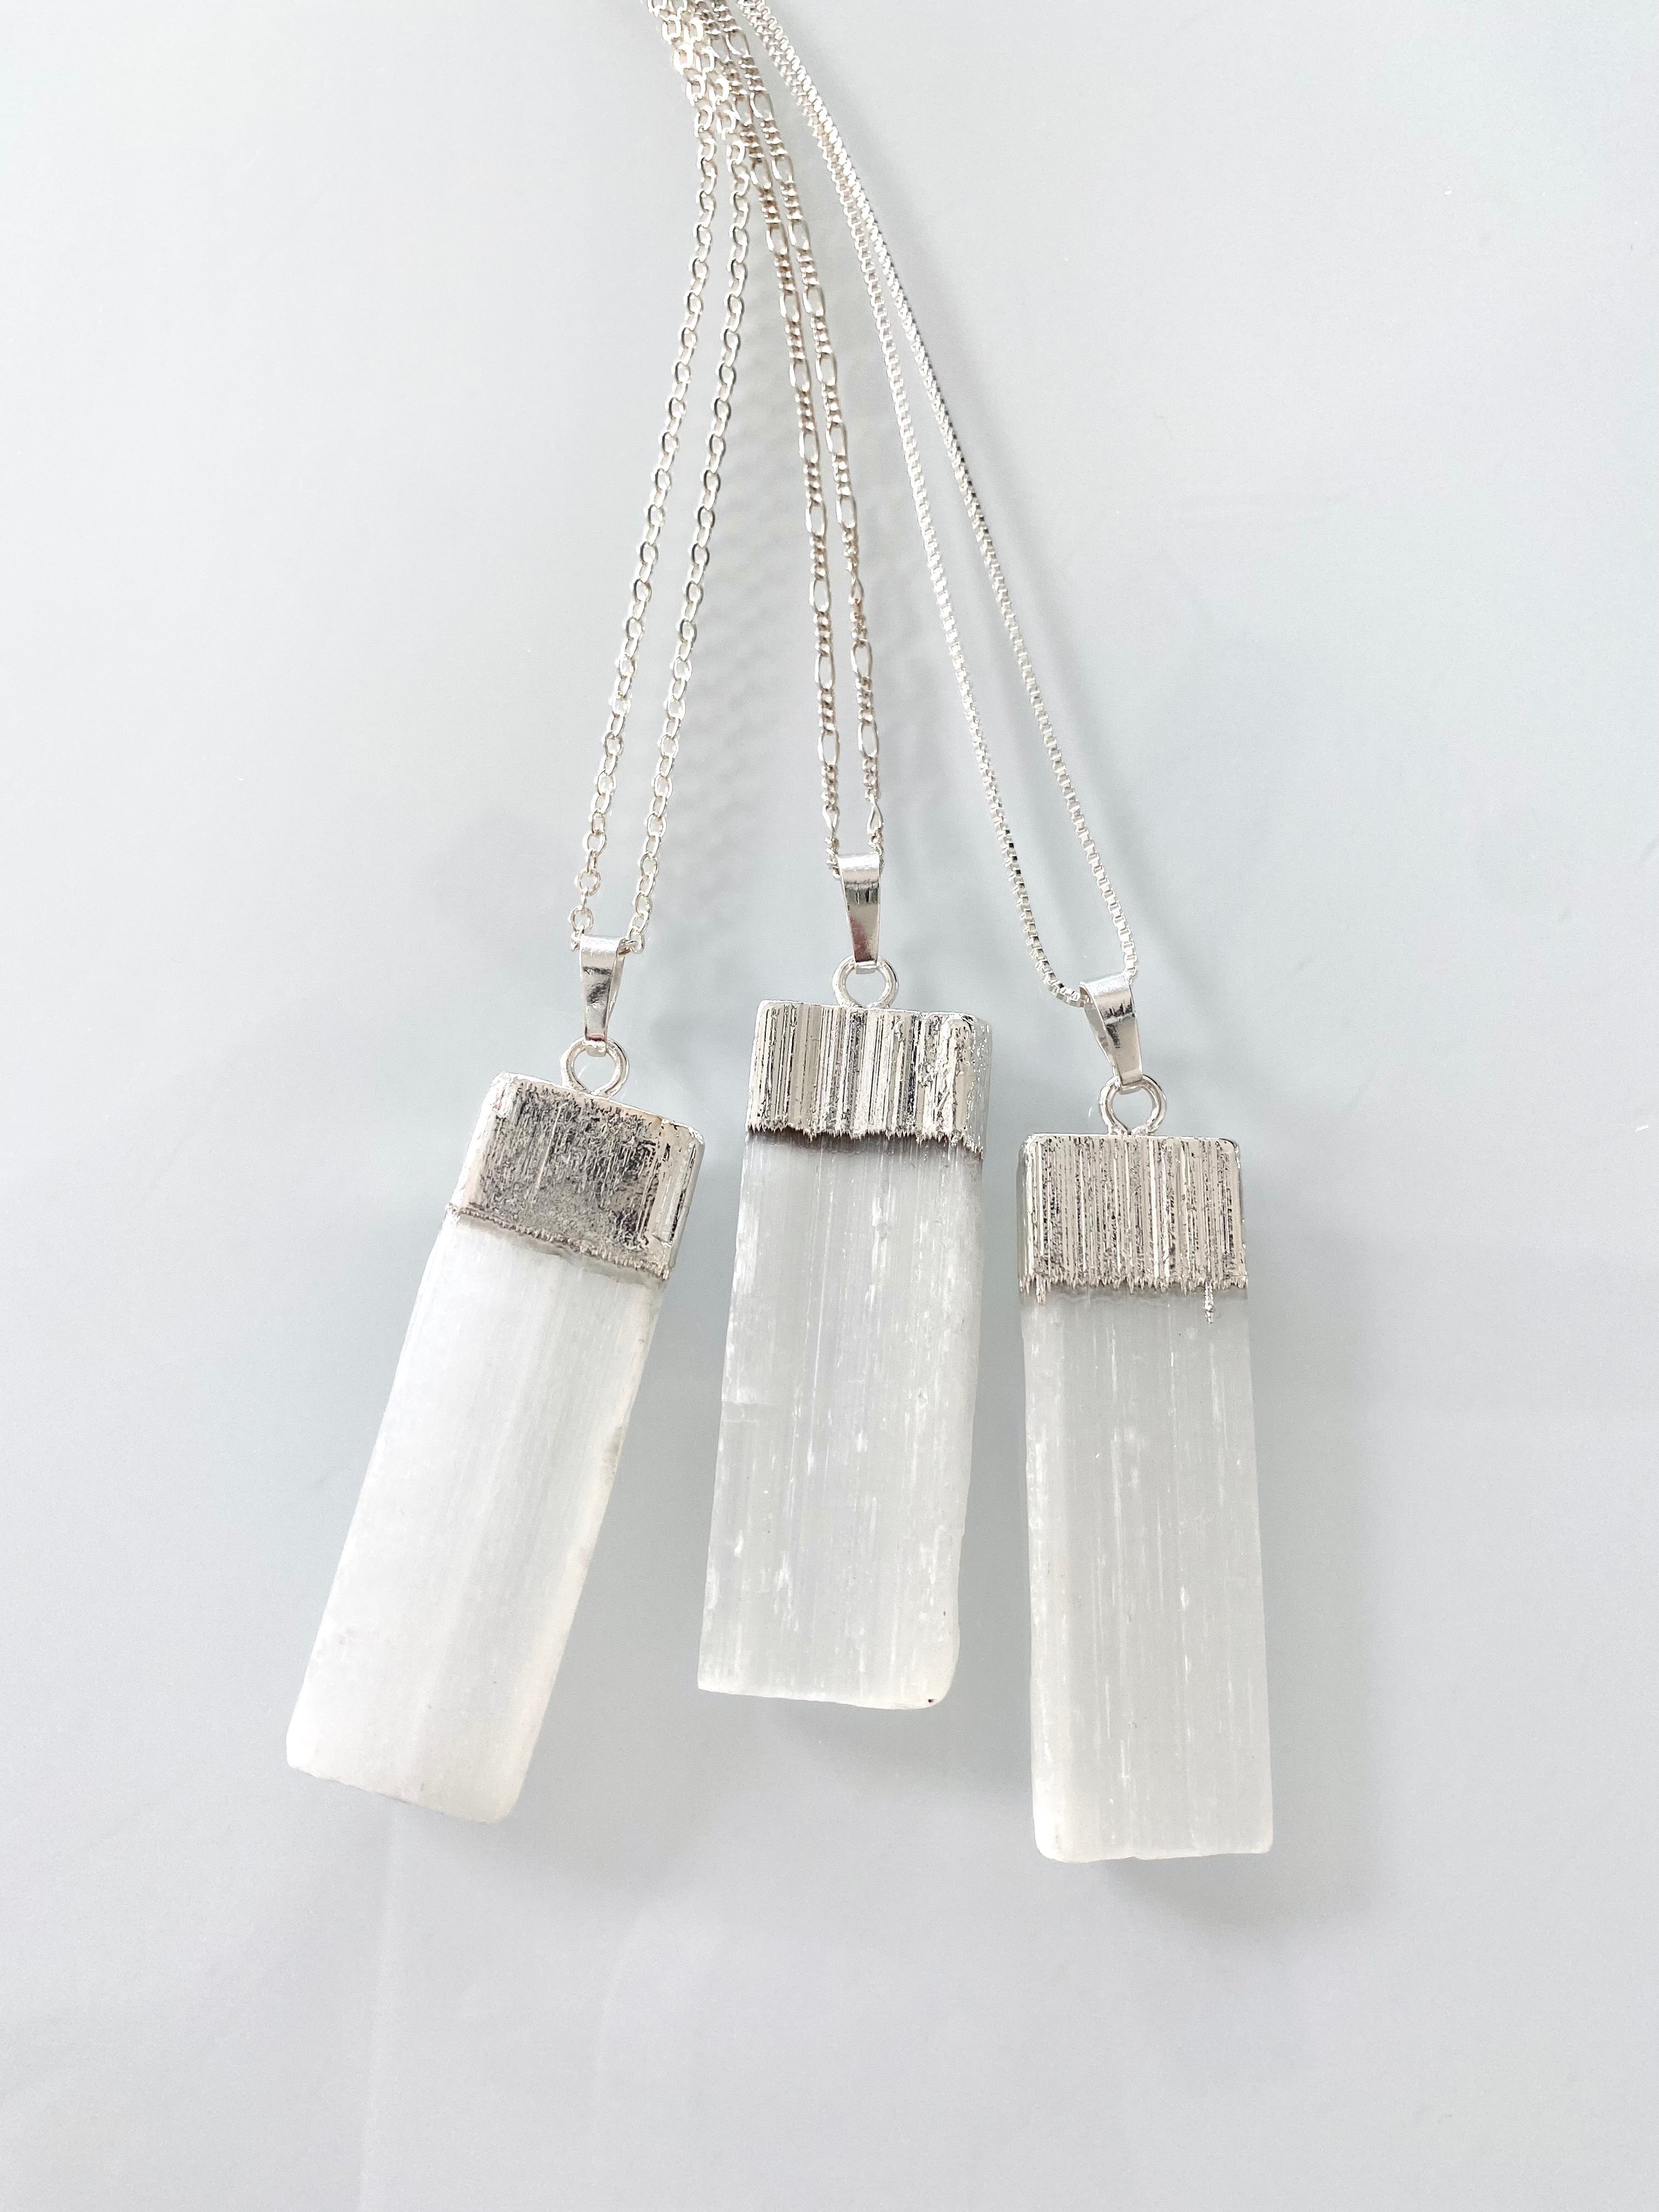 Raw Selenite Bar Pendant Necklace - Sterling Silver Chain